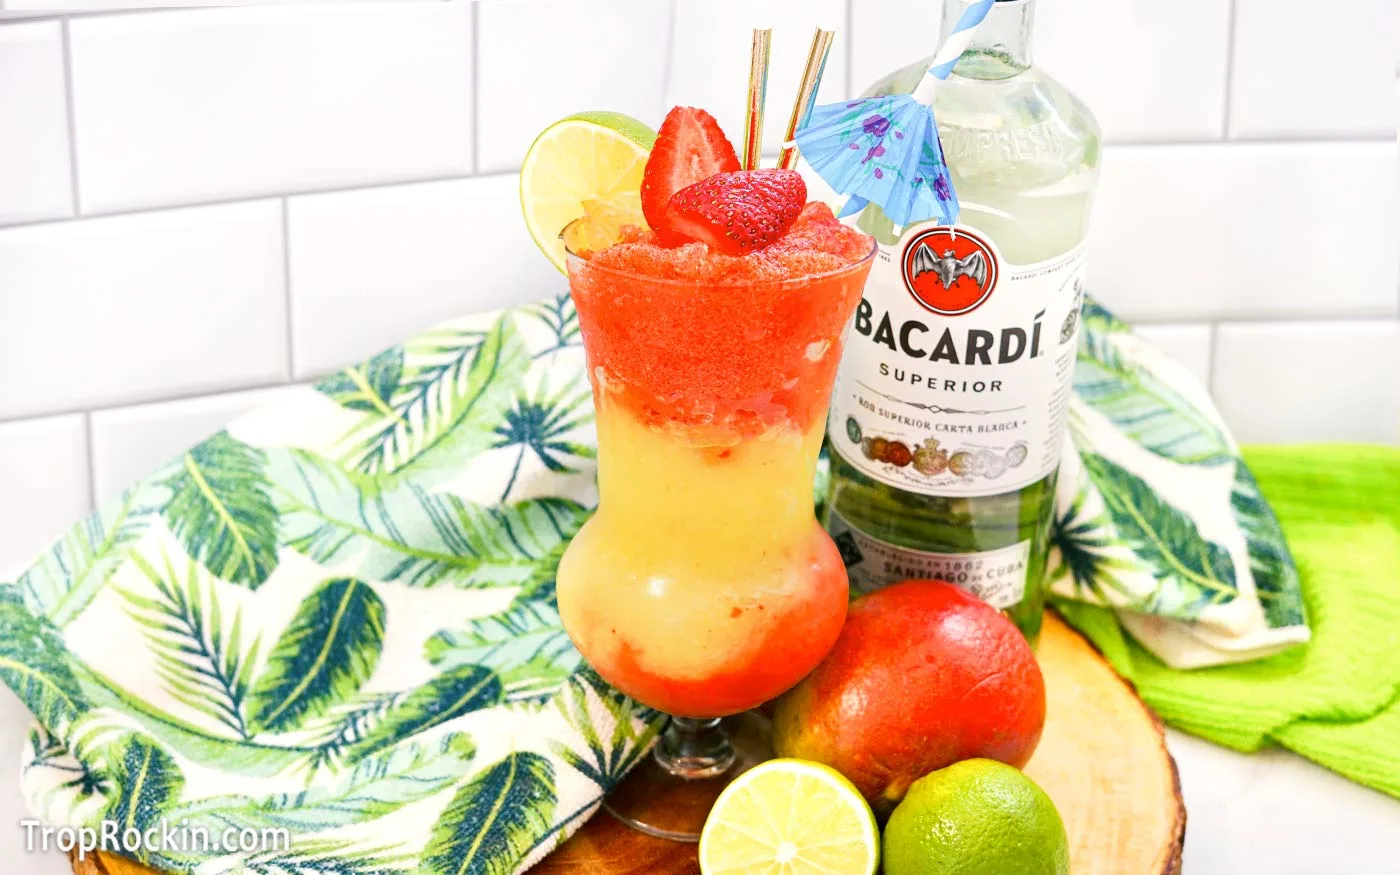 Strawberry Mango Daiquiri with fresh strawberries for garnish. Bottle of Bacardi Light Rum in the background with a fresh mango and limes on the counter.